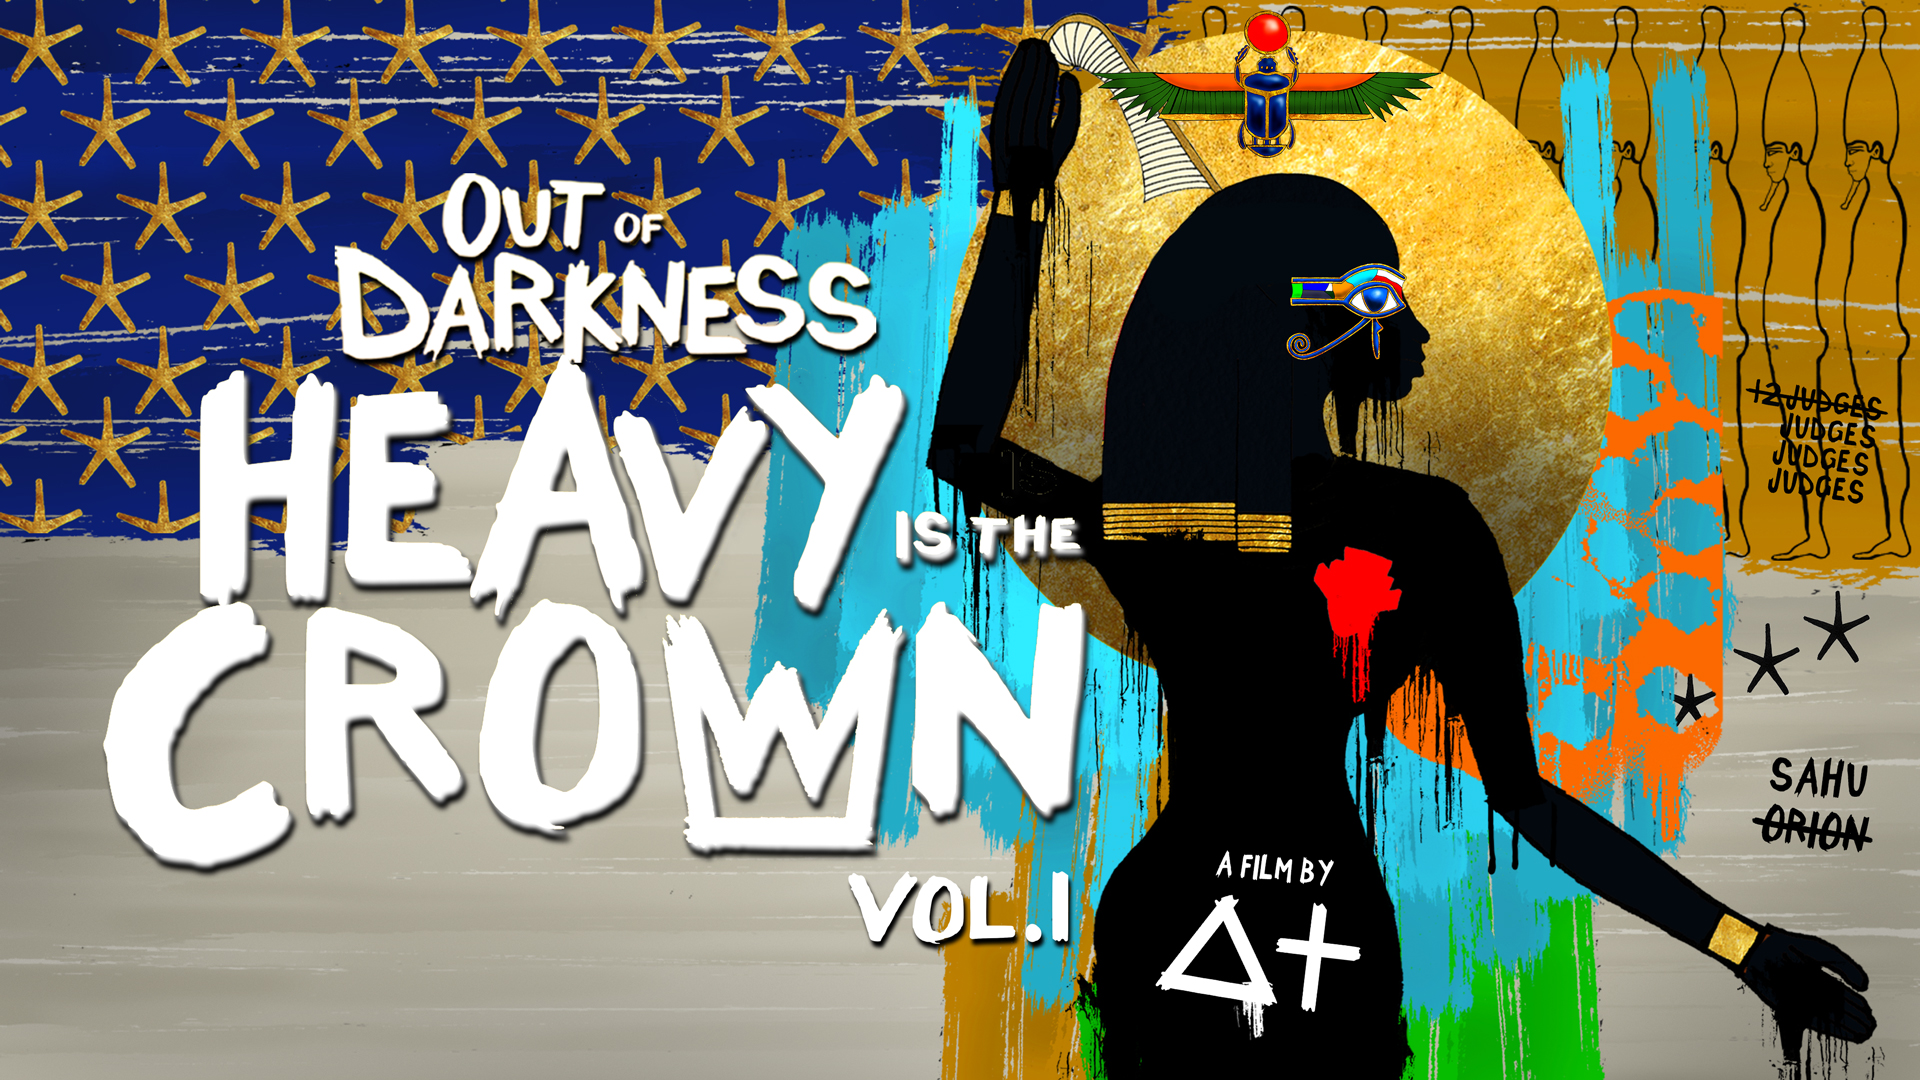 Read more about the article BHM Screening of ‘Out of Darkness: Heavy is the Crown Vol. 1’